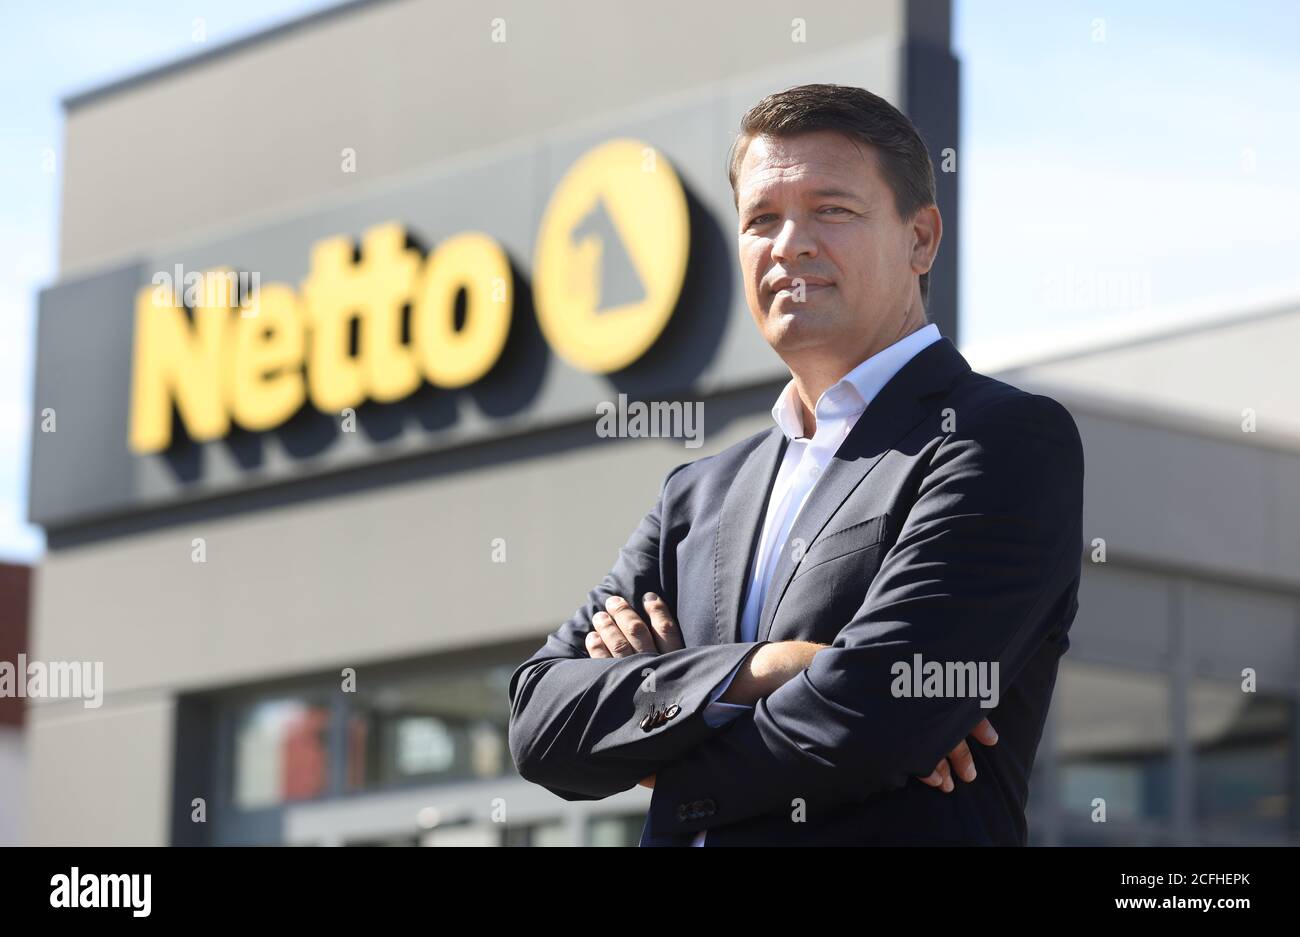 03 September 2020, Mecklenburg-Western Pomerania, Malchin: Managing Director Ingo Panknin of the retail chain Netto ApS & Co. KG stands in front of a Netto branch in Malchin. The first branch opened 30 years ago in Vorpommern. In the meantime, the company is one of the largest in the north-east of Germany with around 6000 employees. So far, the discounter has been represented 112 times in Mecklenburg-Western Pomerania alone, 143 times in Berlin and Brandenburg as well as in Saxony, Saxony-Anhalt, Lower Saxony, Hamburg and Schleswig-Holstein. (to dpa 'Only MV retail chain wants to grow - Corona Stock Photo